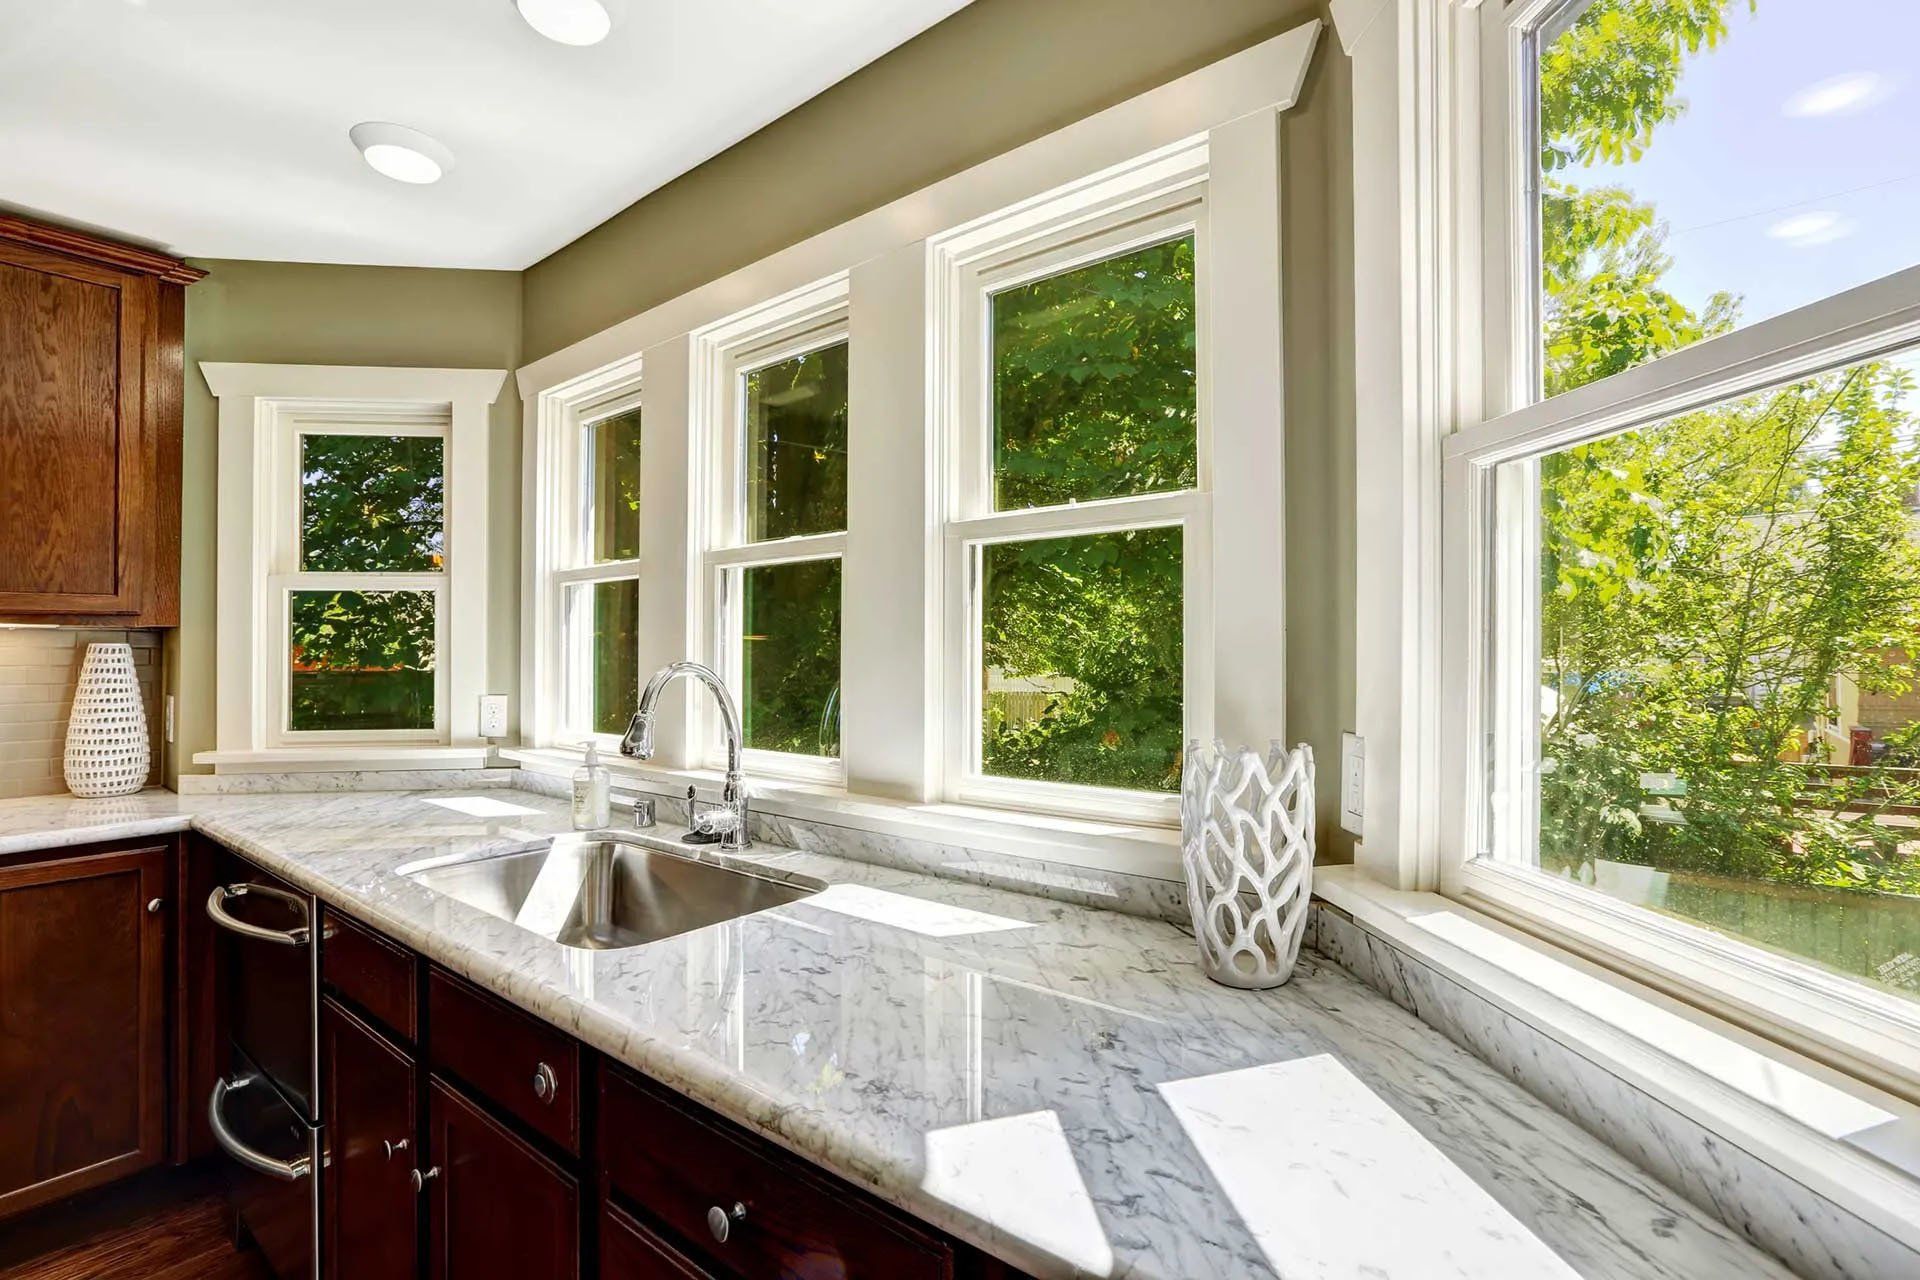 How to Prepare Your Home for Summer with Windows